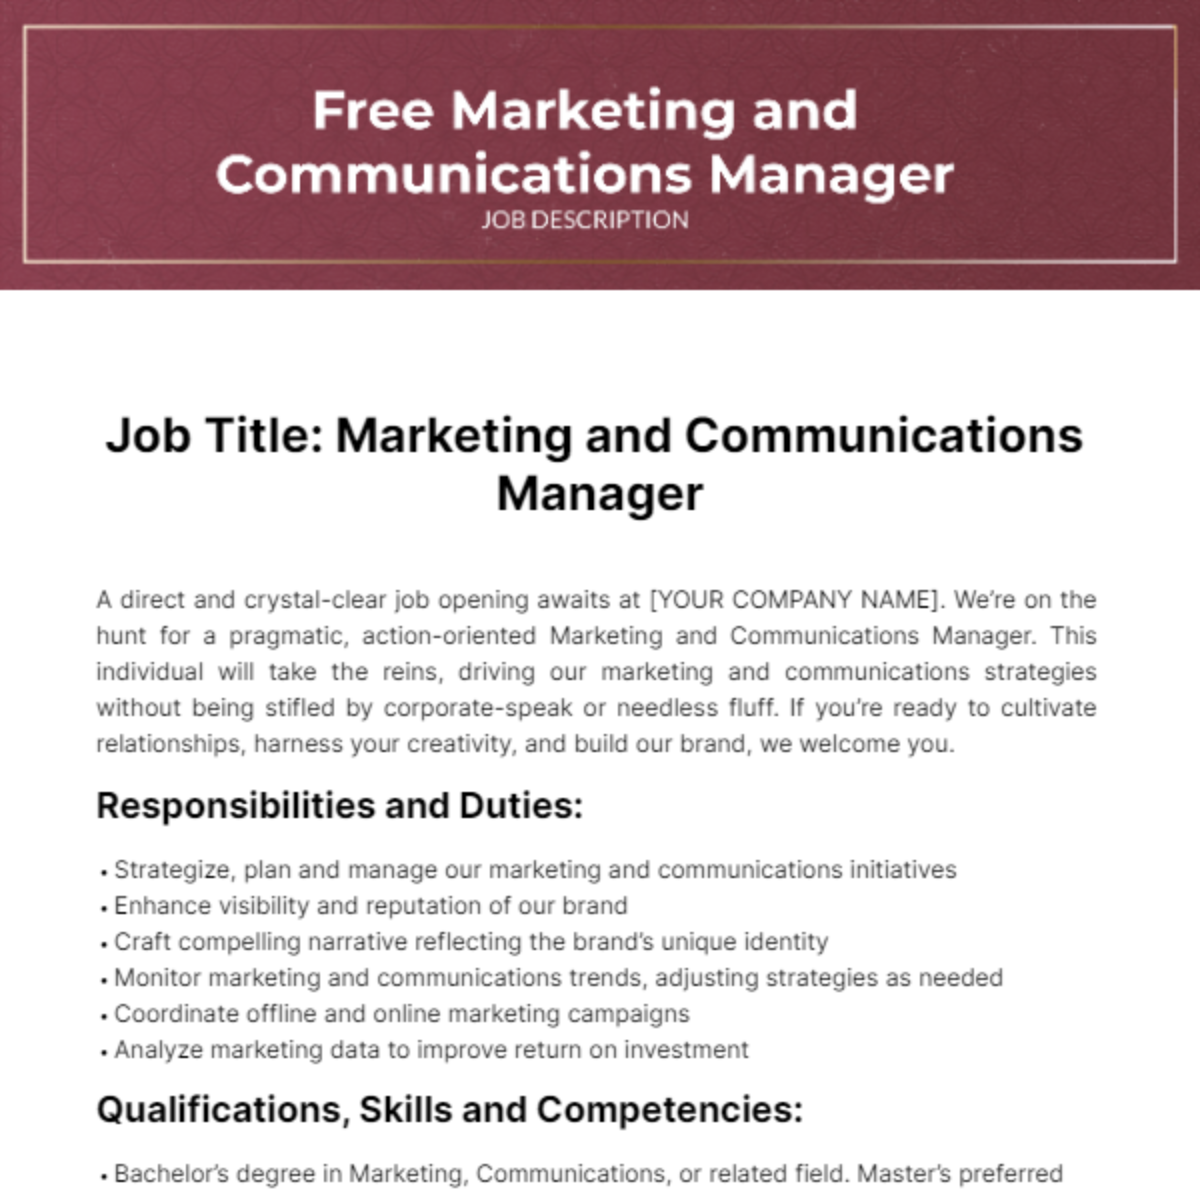 Marketing and Communications Manager Job Description Template